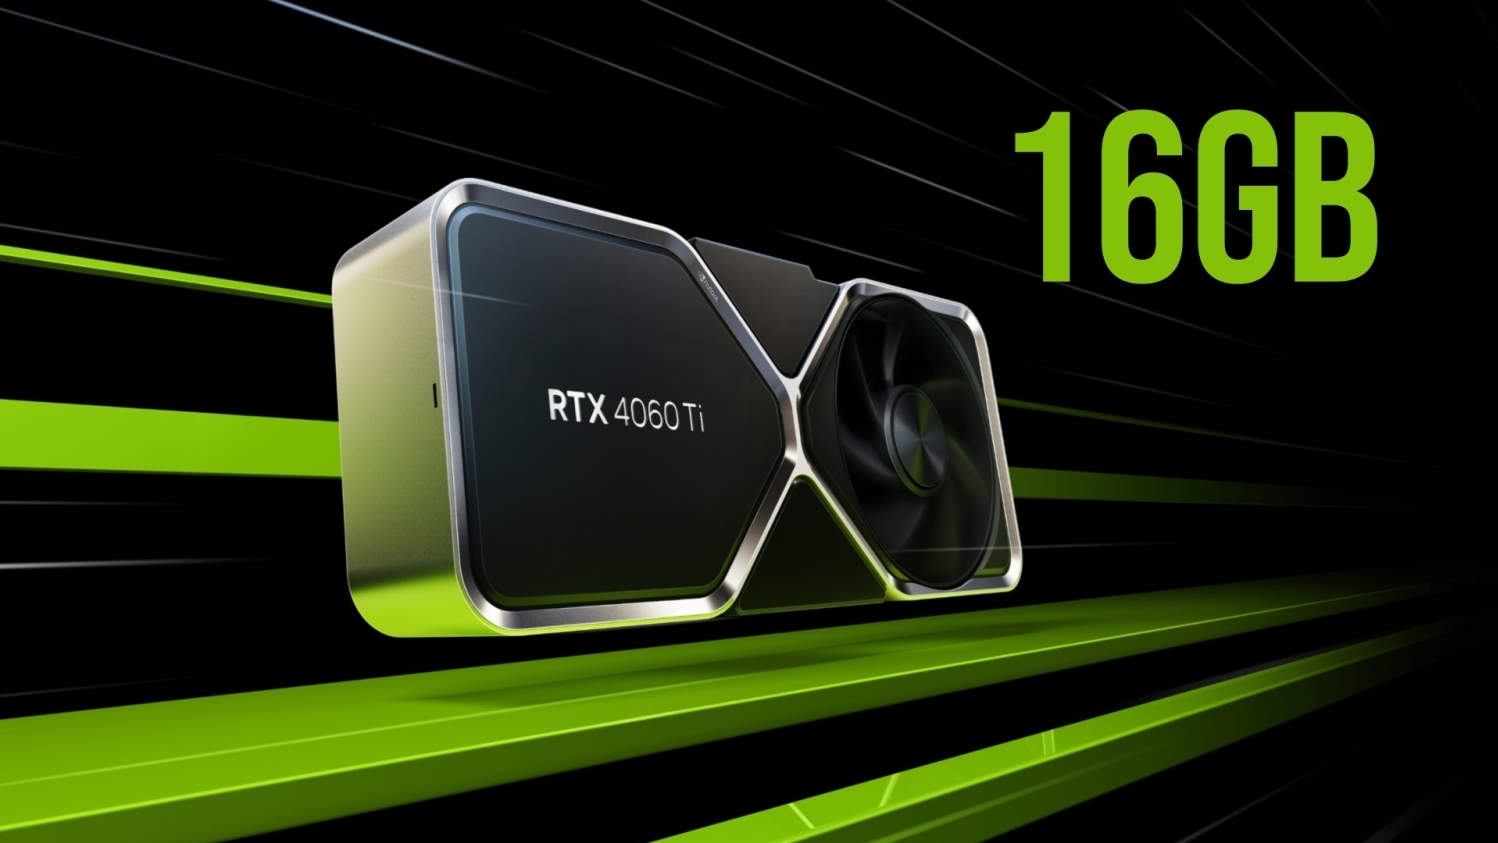 Nvidia Quietly Launches GeForce RTX 4060 Ti 16GB Card, Without